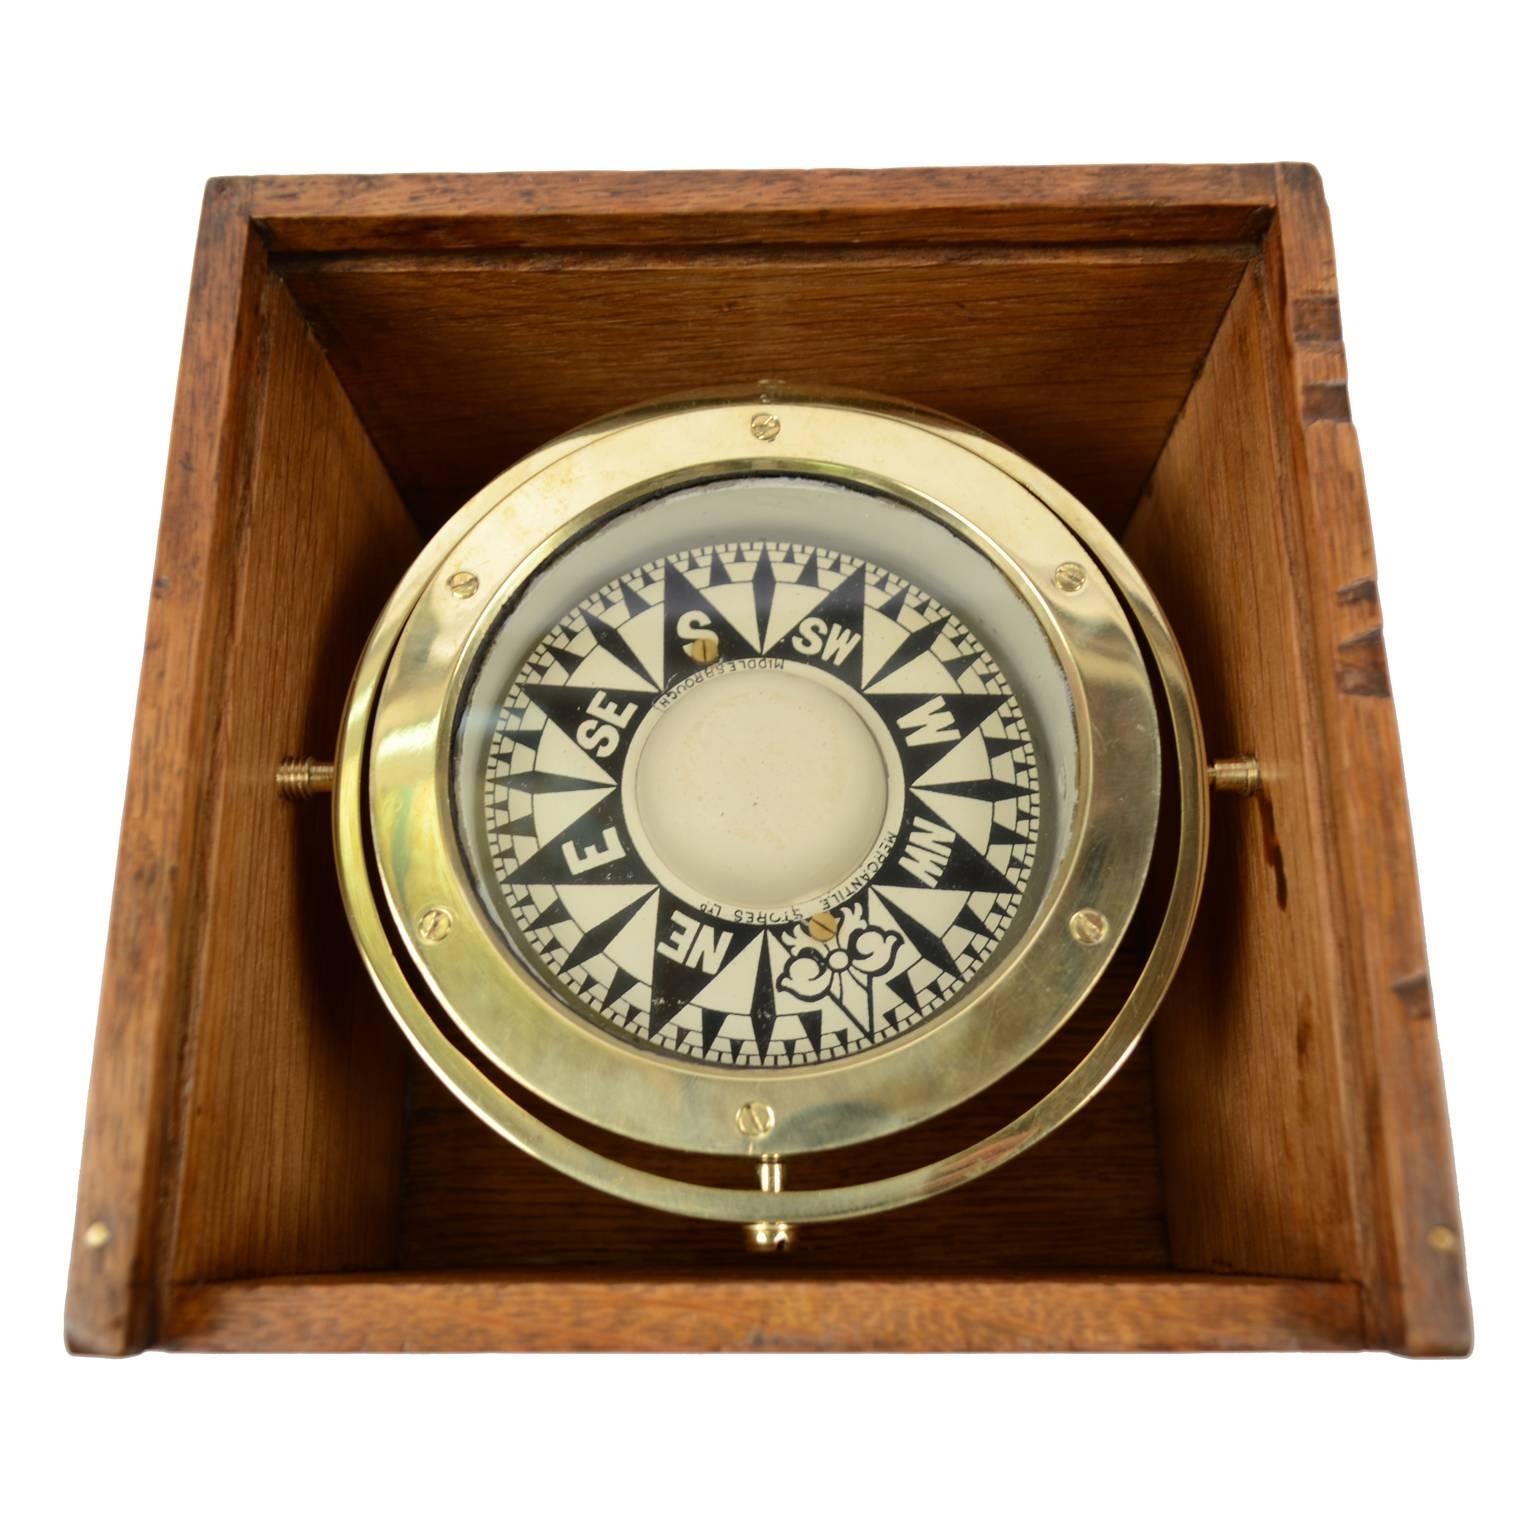 Nautical liquid compass made in 1920s, trade by Mercantile Stores Ltd Middlesbrough. It is mounted on universal joint and placed in its original wooden box. Measures: cm 19 x 19 x 14(H). Very good condition and working.